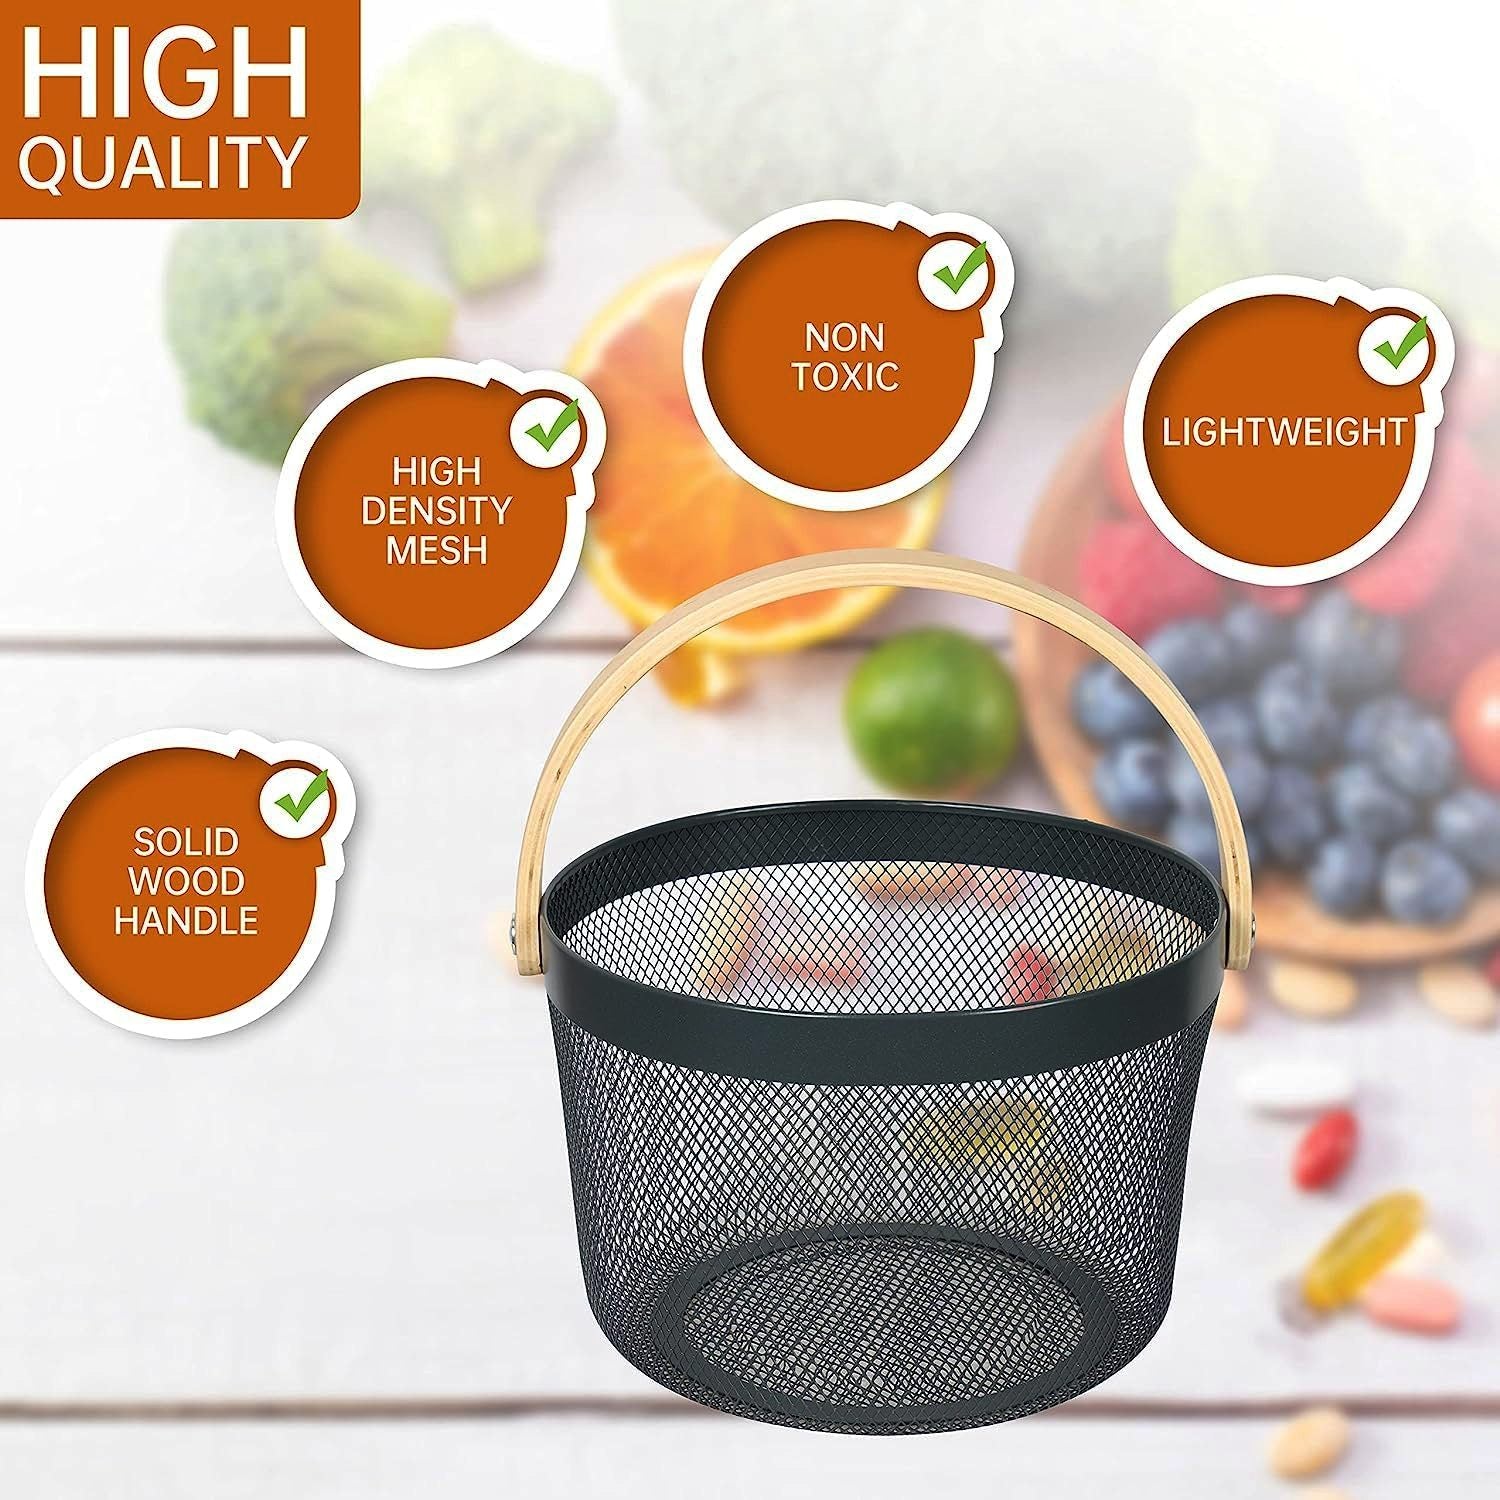 Mesh Steel Basket with Wooden Handle-Round Black Apricot